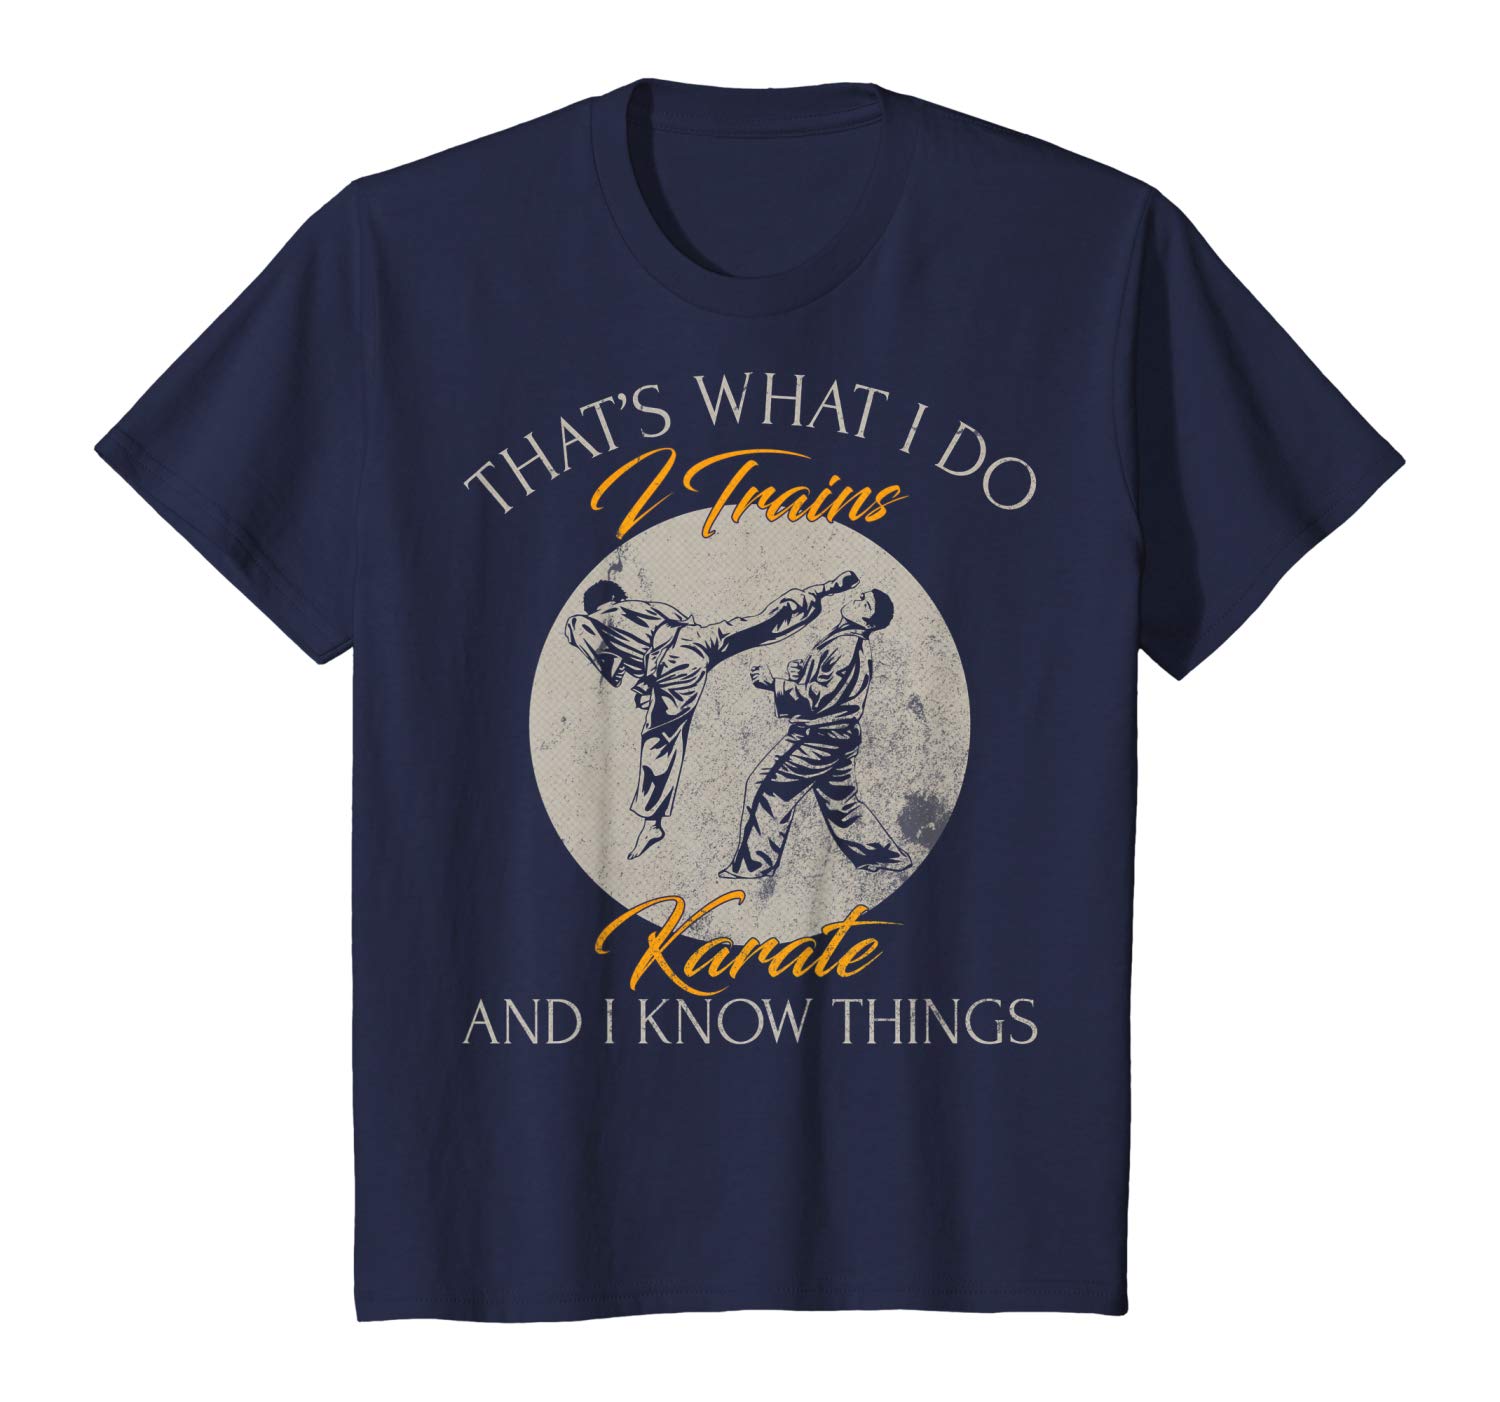 Awesome That’s What I Do, I Trains Karate And I Know Things Funny T-Shirt T-Shirt Sweatshirt Hoodie